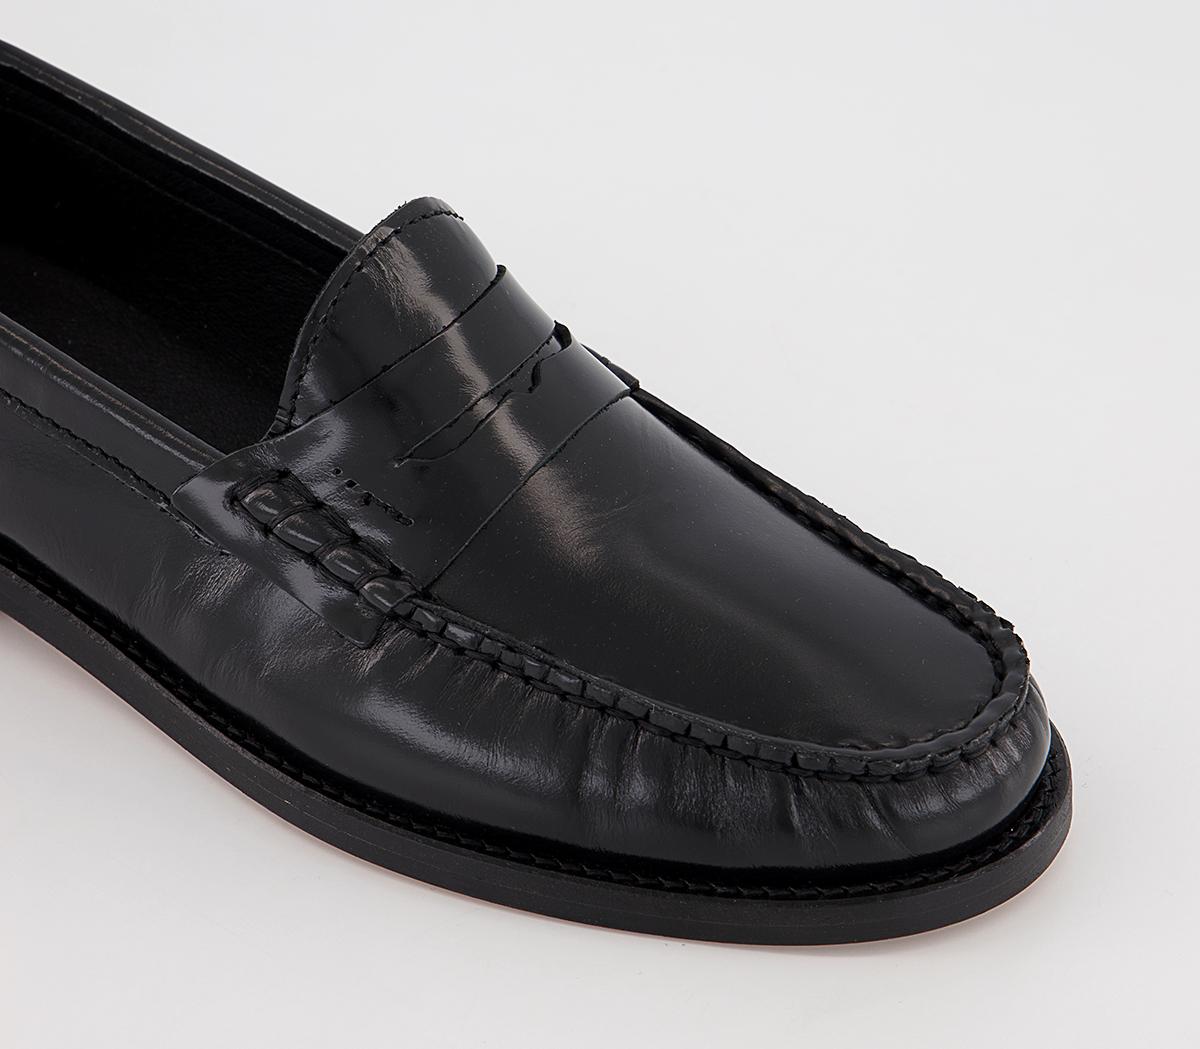 OFFICE Finch Penny Loafers Black Leather - Monday to Friday